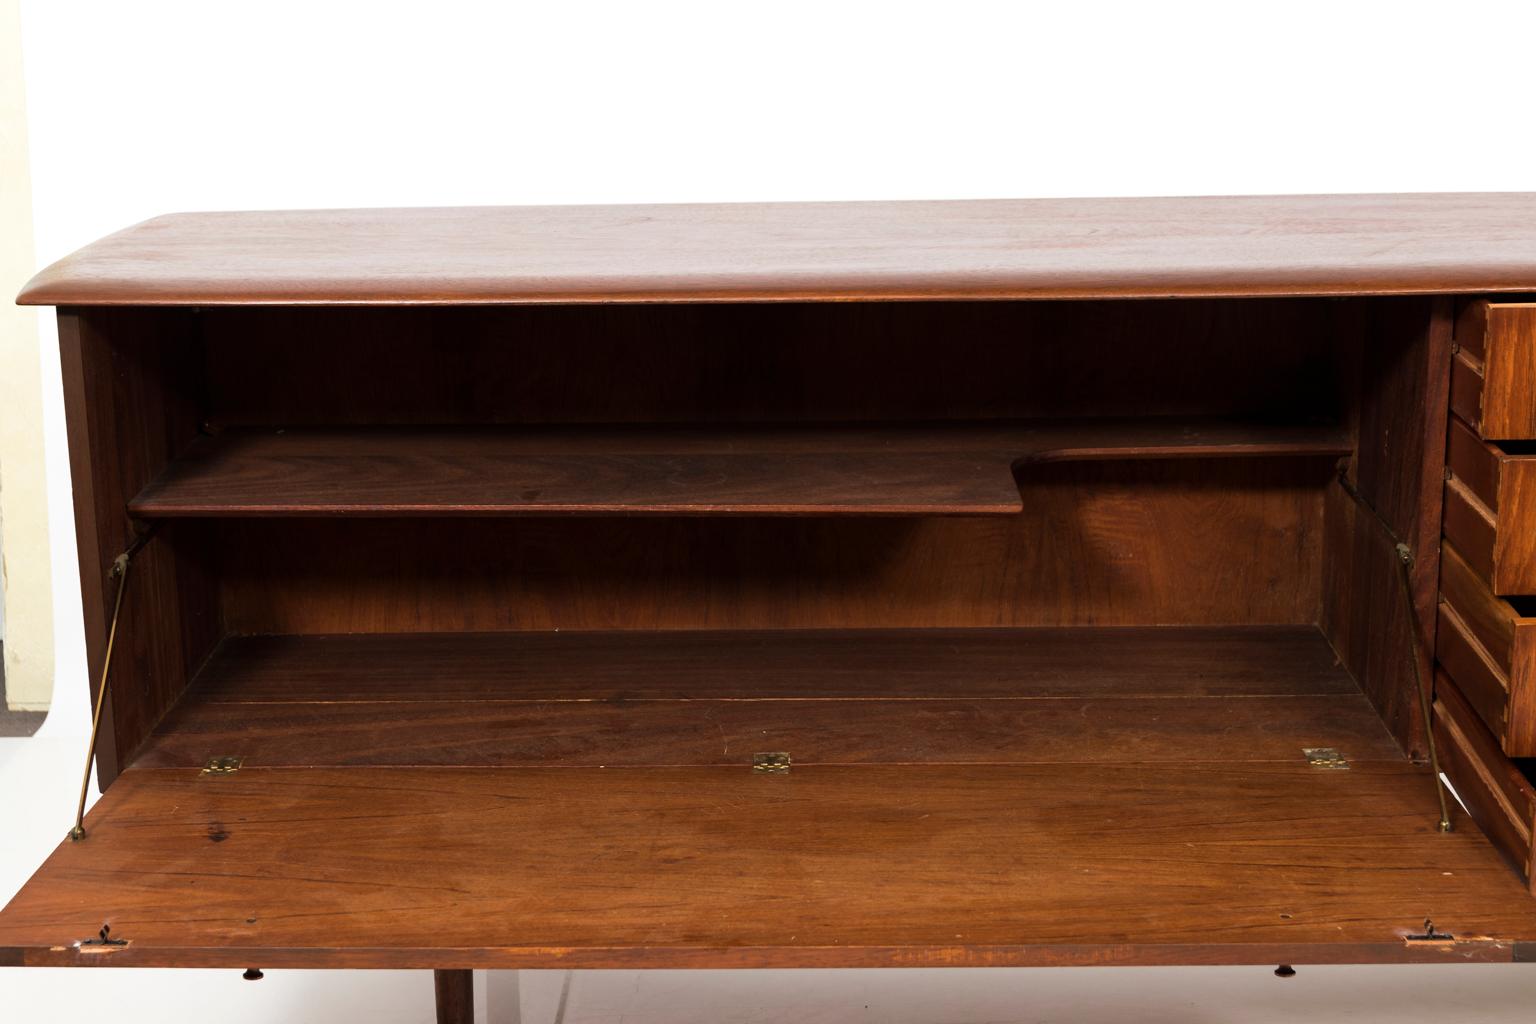 Mid-Century Modern server table by Dalescraft in teak wood from Liverpool, England, circa 1950-1960. The server comes with five drawers and two cabinets.
 